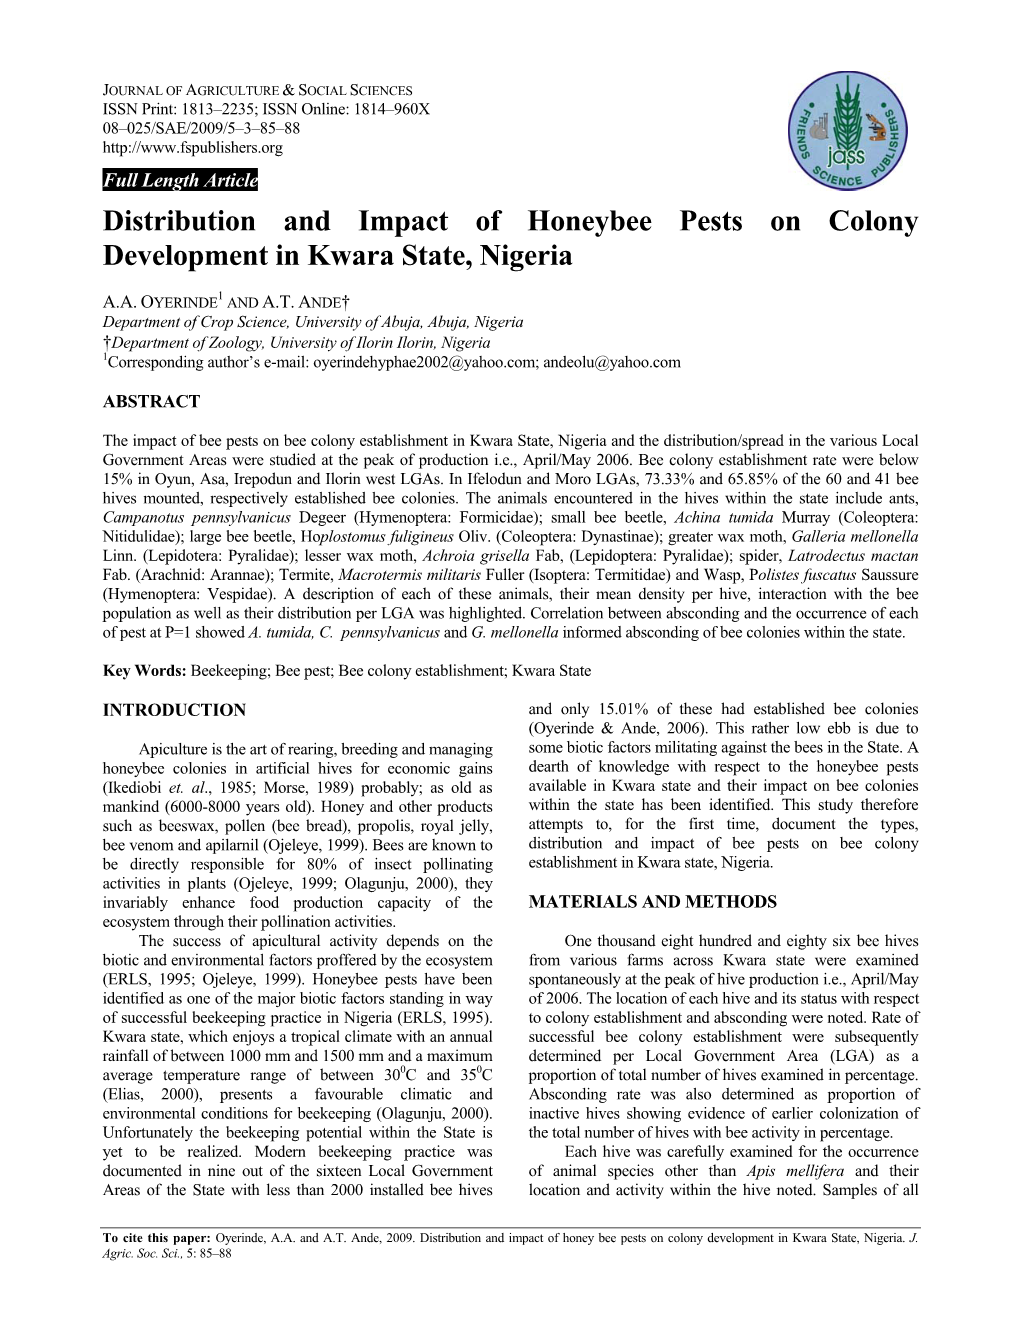 Distribution and Impact of Honeybee Pests on Colony Development in Kwara State, Nigeria